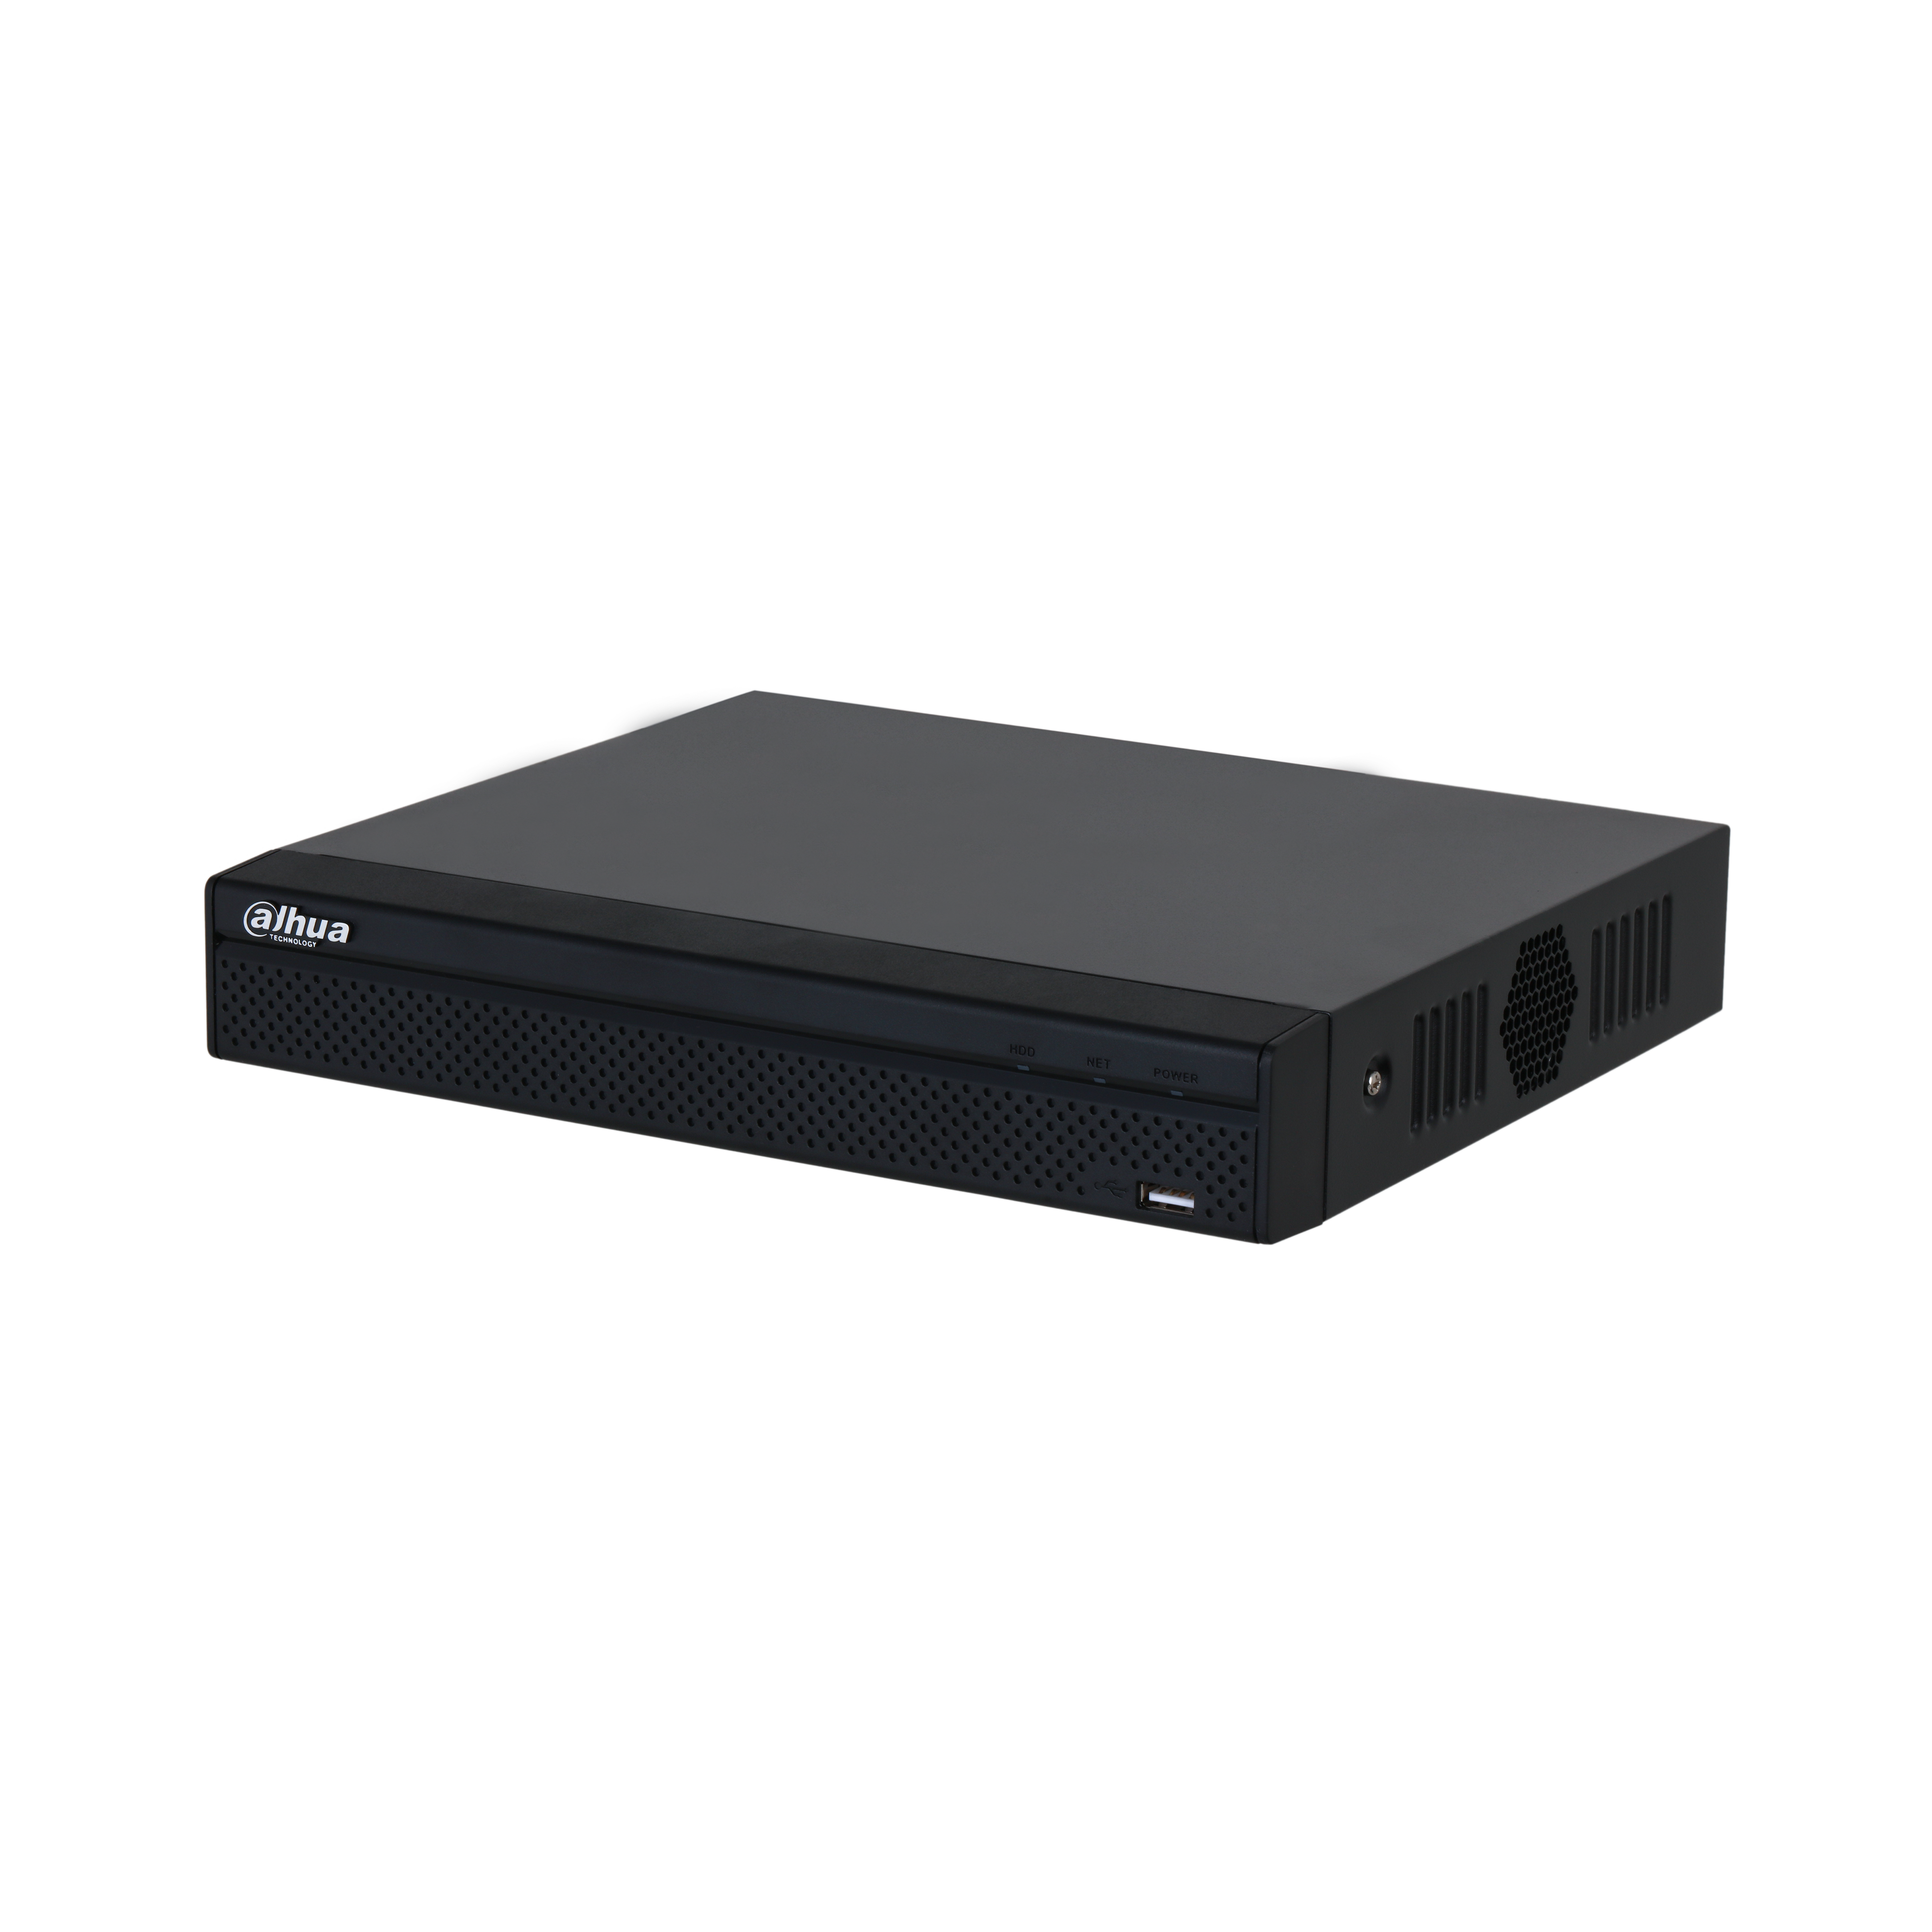 DAHUA NVR2108HS-S3 8 Channel Compact 1U 1HDD Network Video Recorder